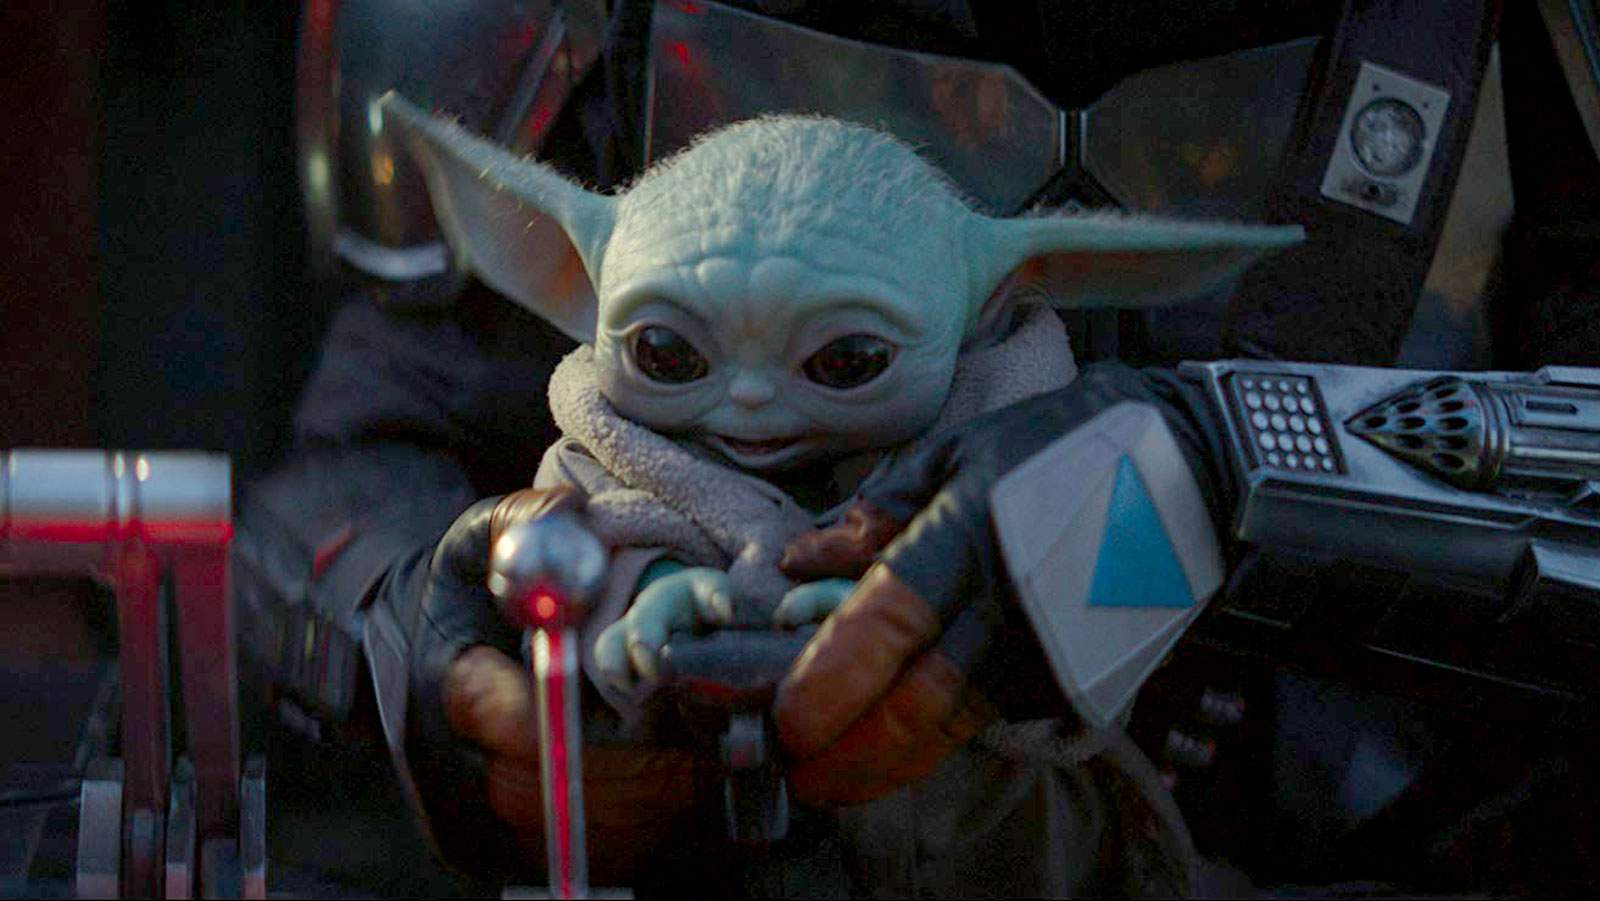 These baby Yoda memes are driving the internet crazy